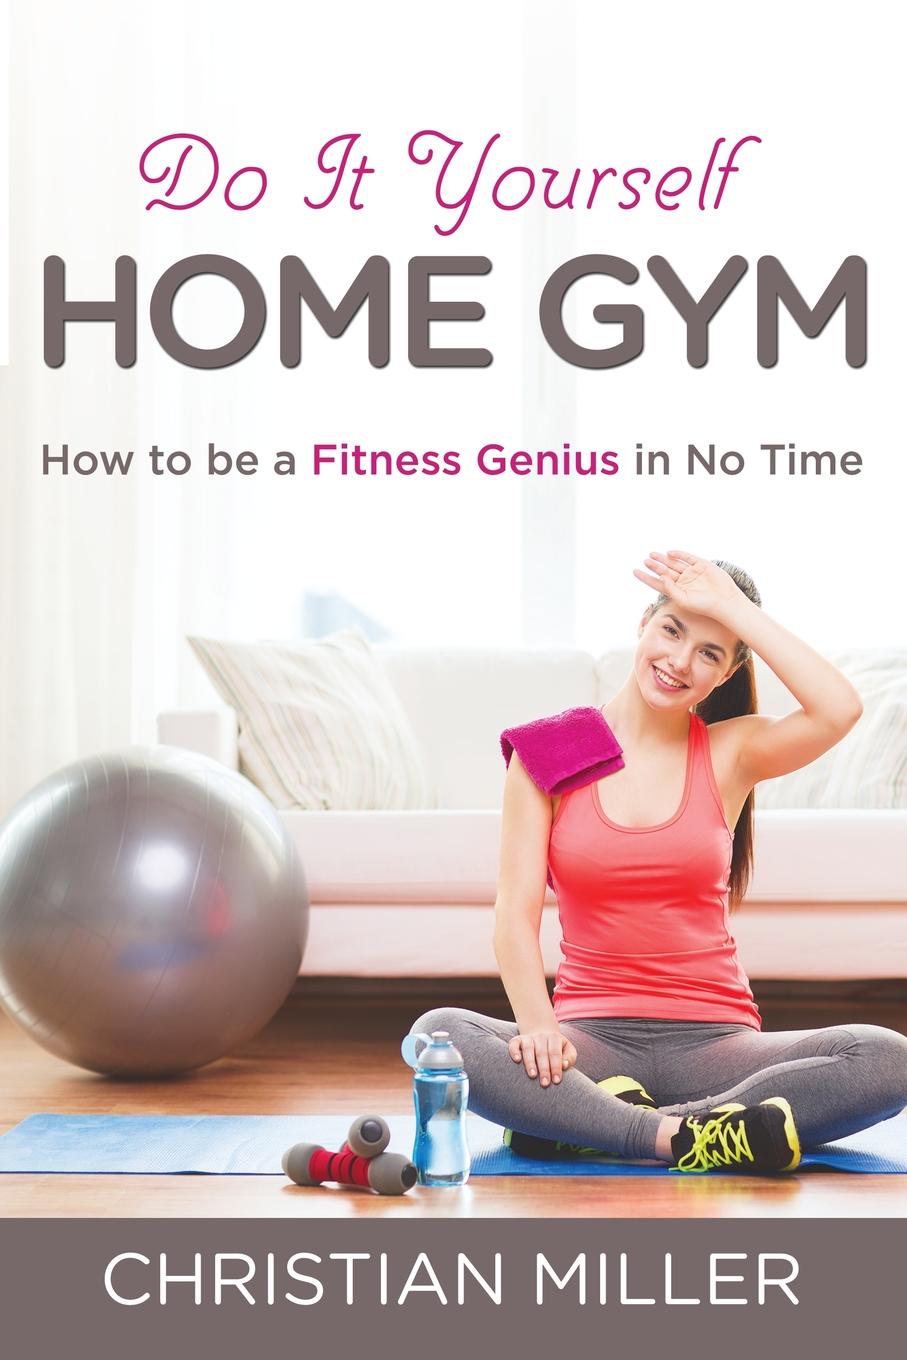 Do It Yourself Home Gym. How to be a Fitness Genius in No Time